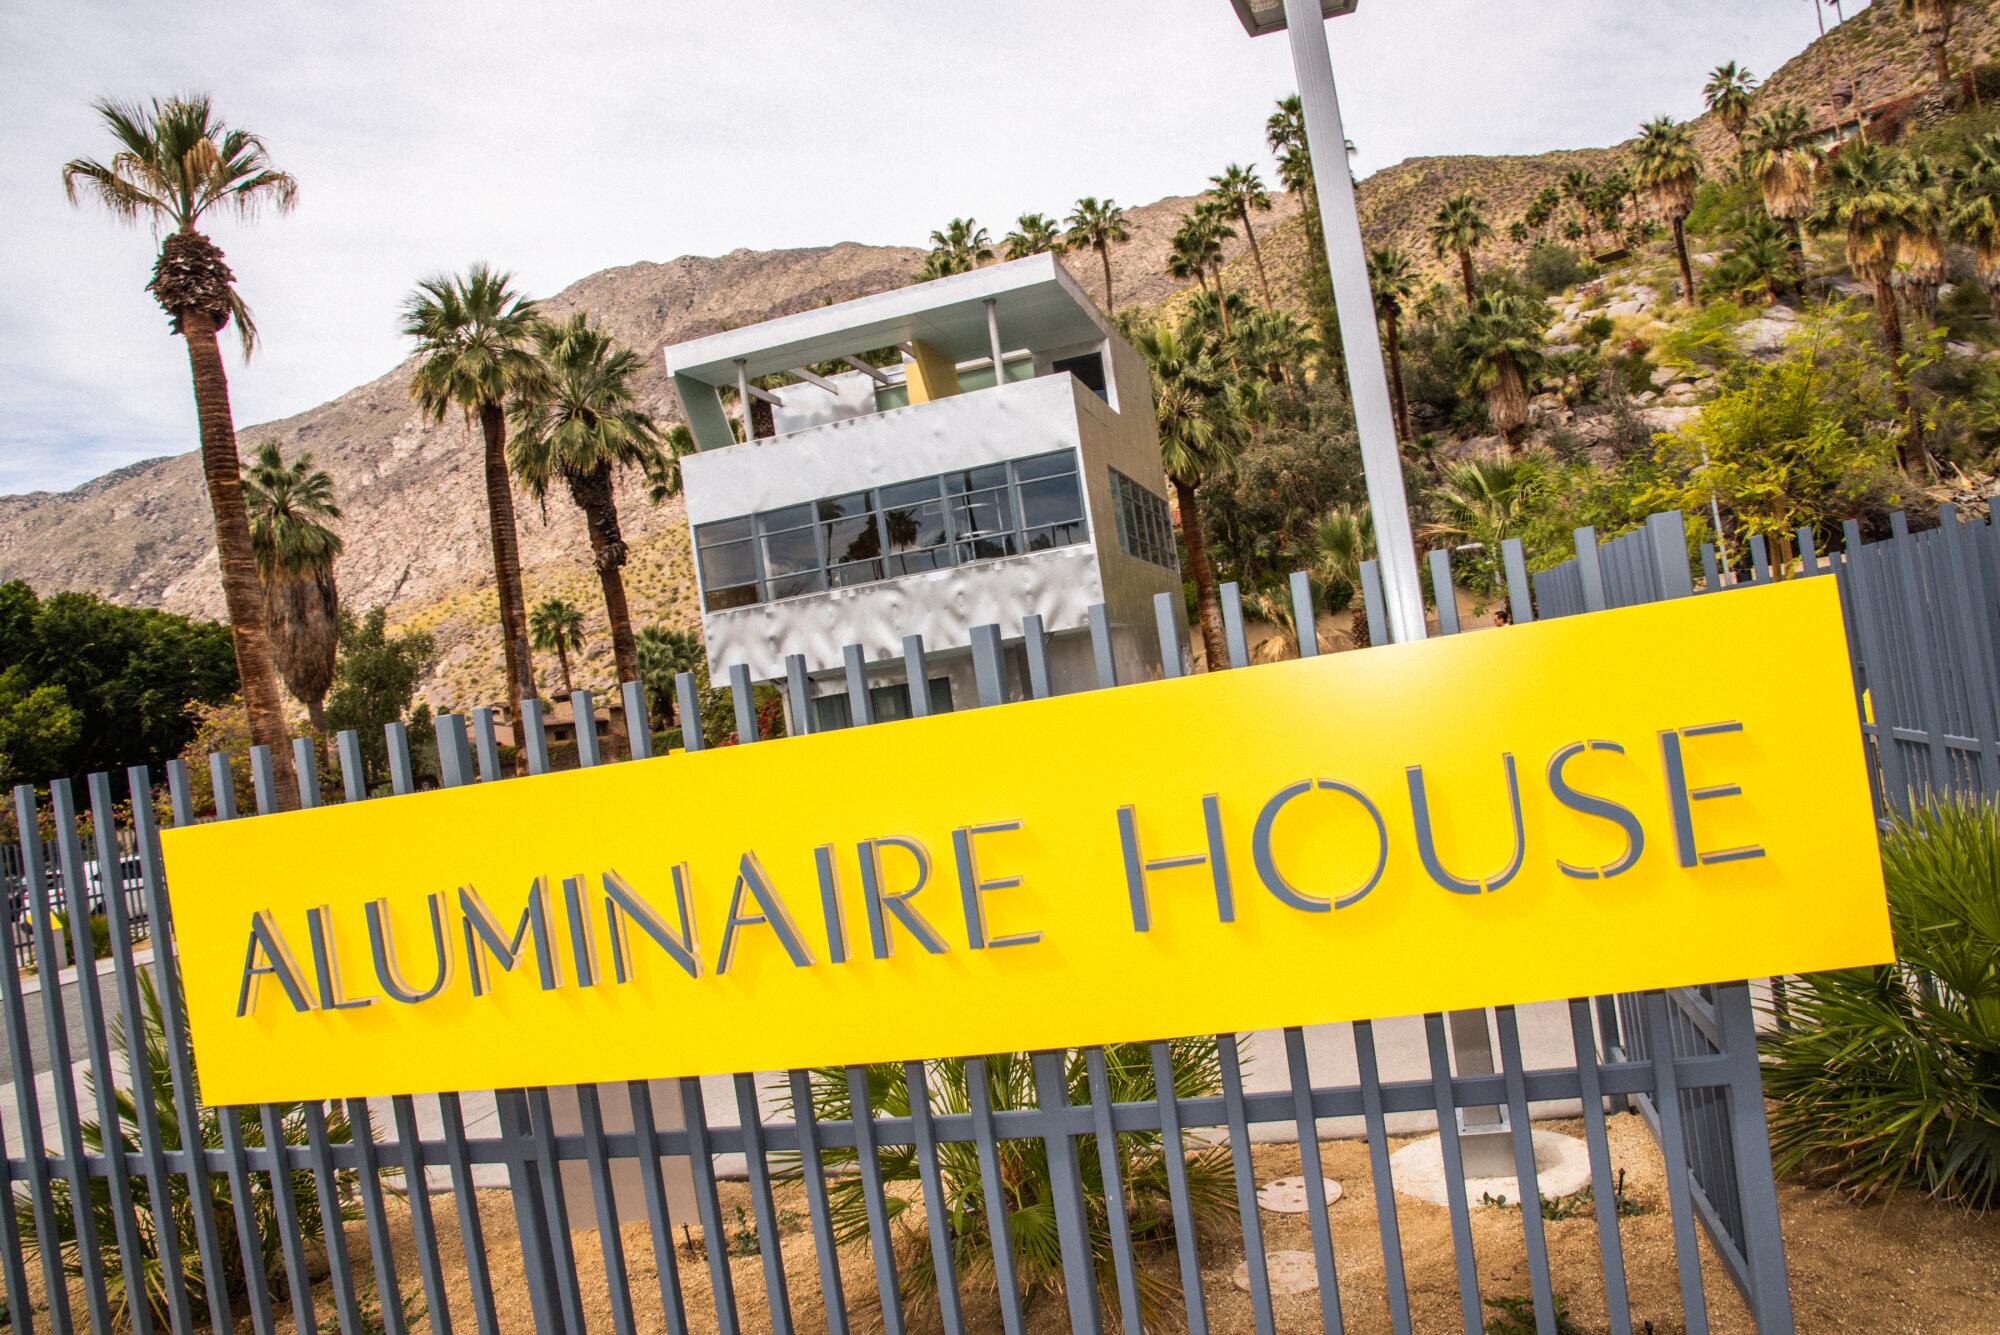 The Aluminaire House at the Palm Springs Art Museum.